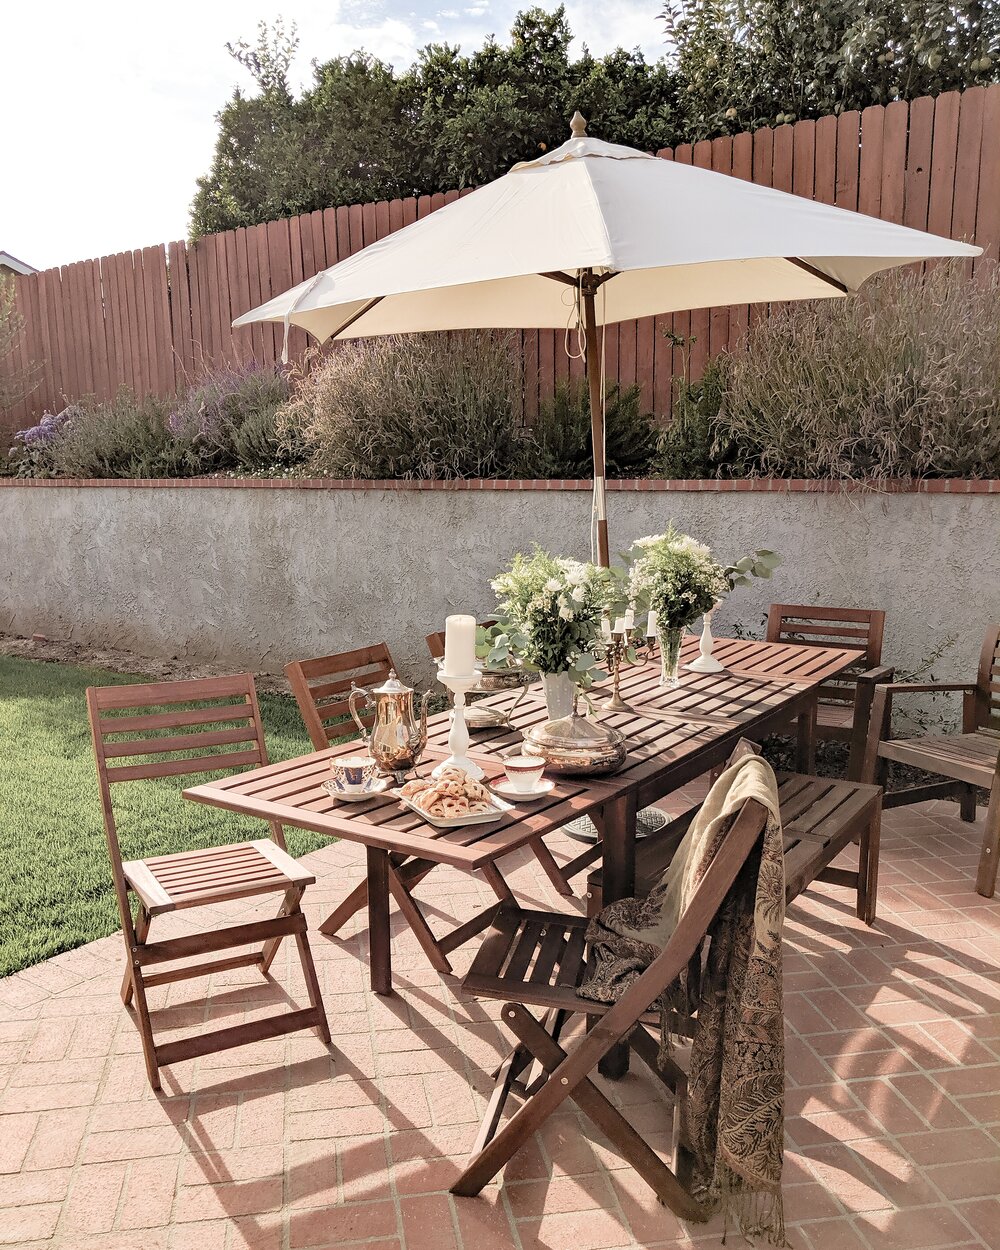 A brown wood patio set with a white umbrella on a brick patio. The table is filled with tea party supplies and vases of white flowers.